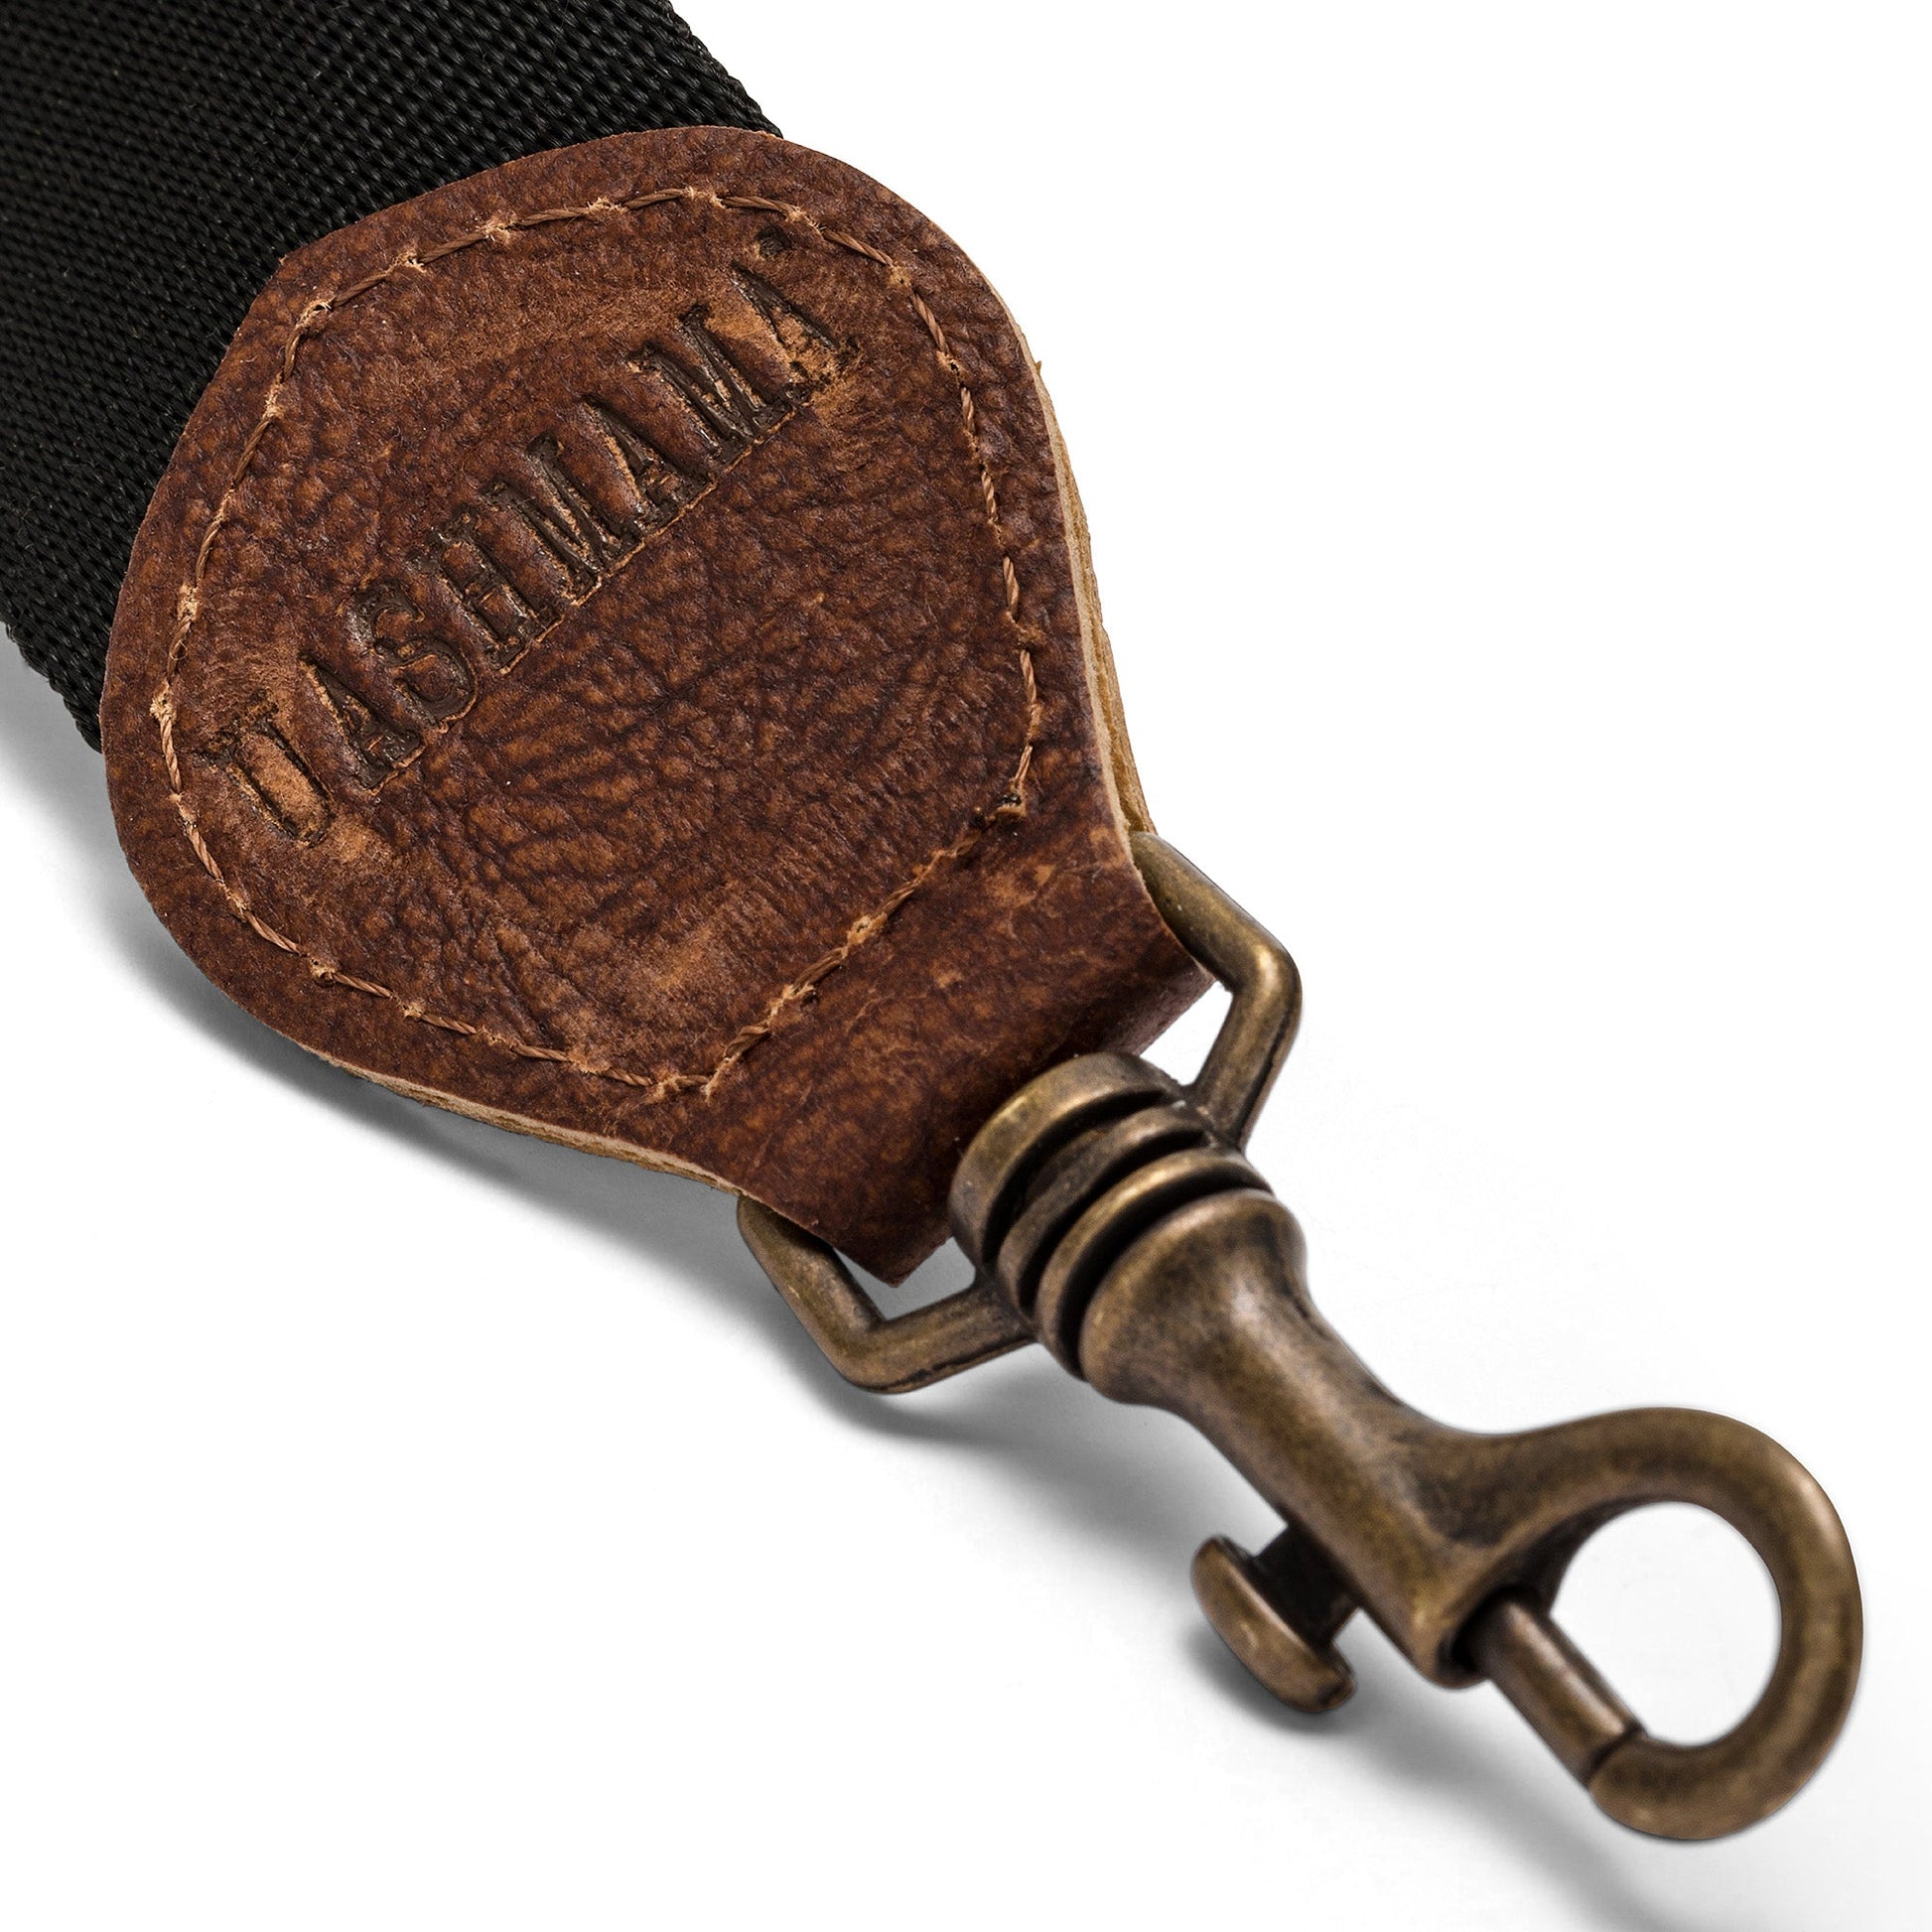 A black strap is shown with washable paper details and a metallic retractable clip.